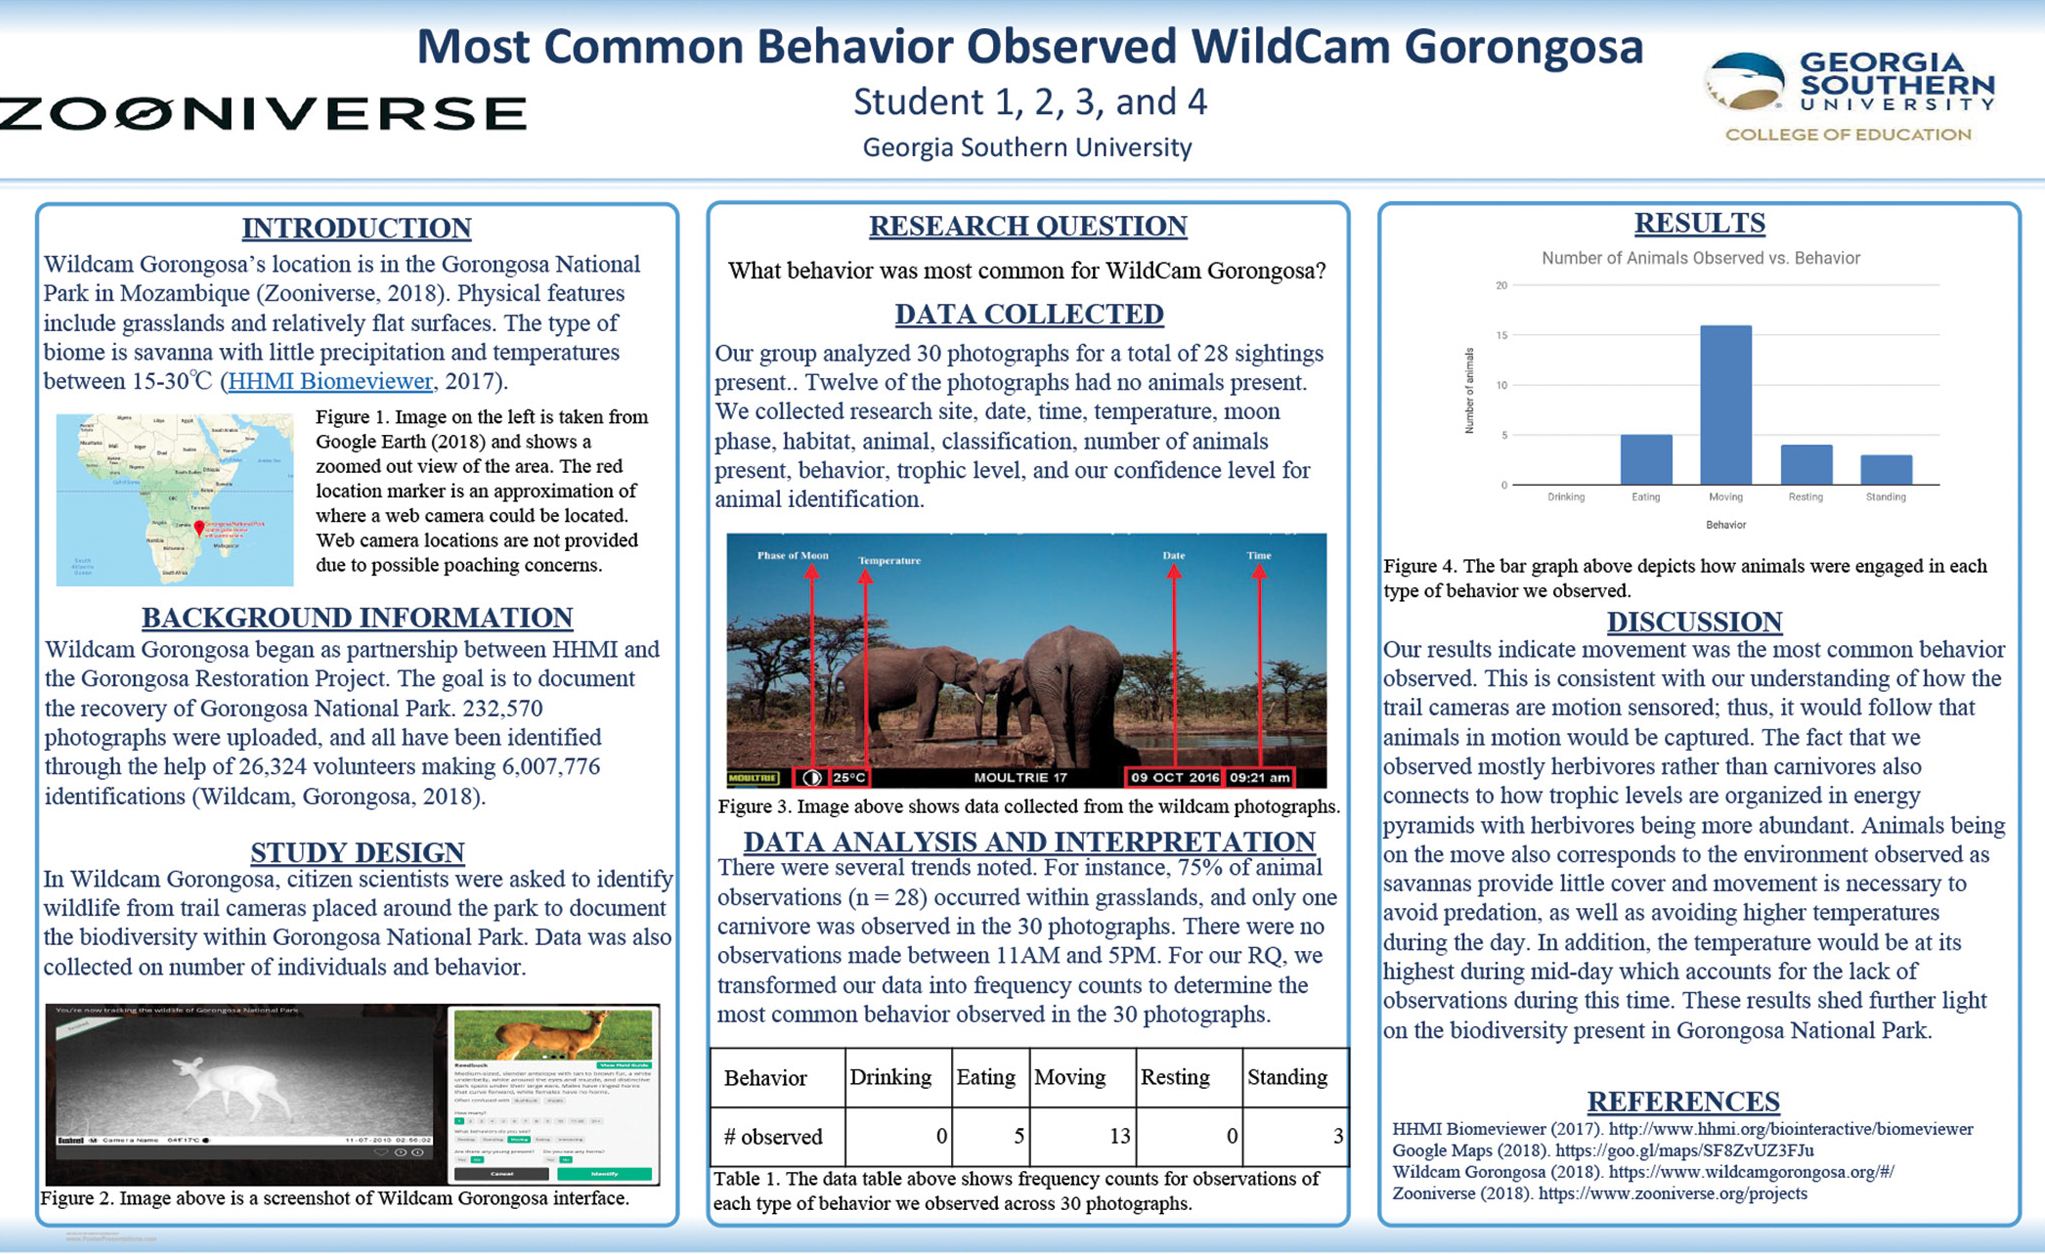 Scientific poster we provided to students at the beginning of the learning experience.